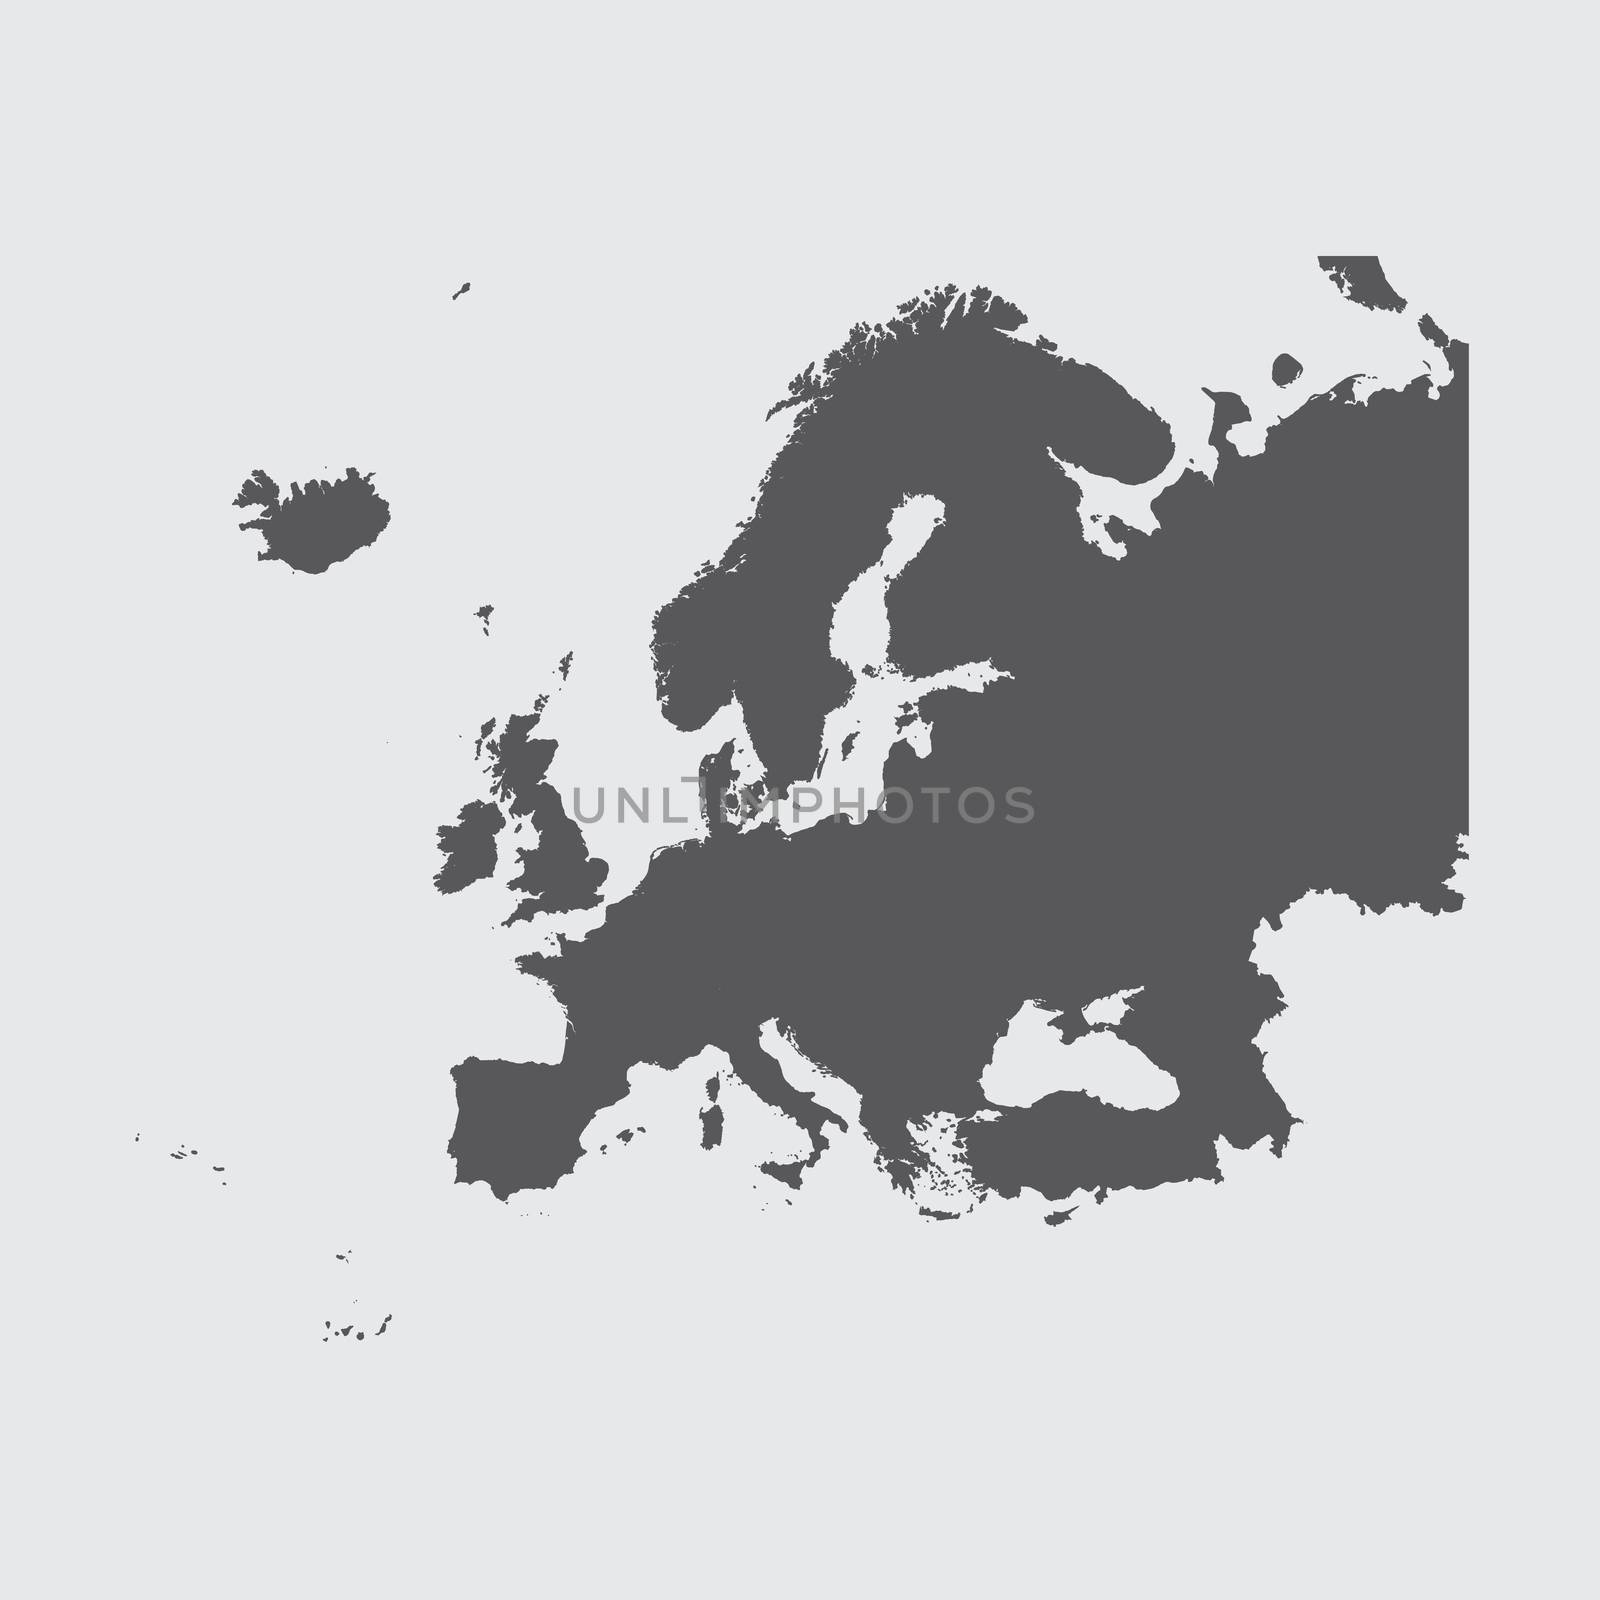 Illustration on isolated background of the continent of Europe by DragonEyeMedia